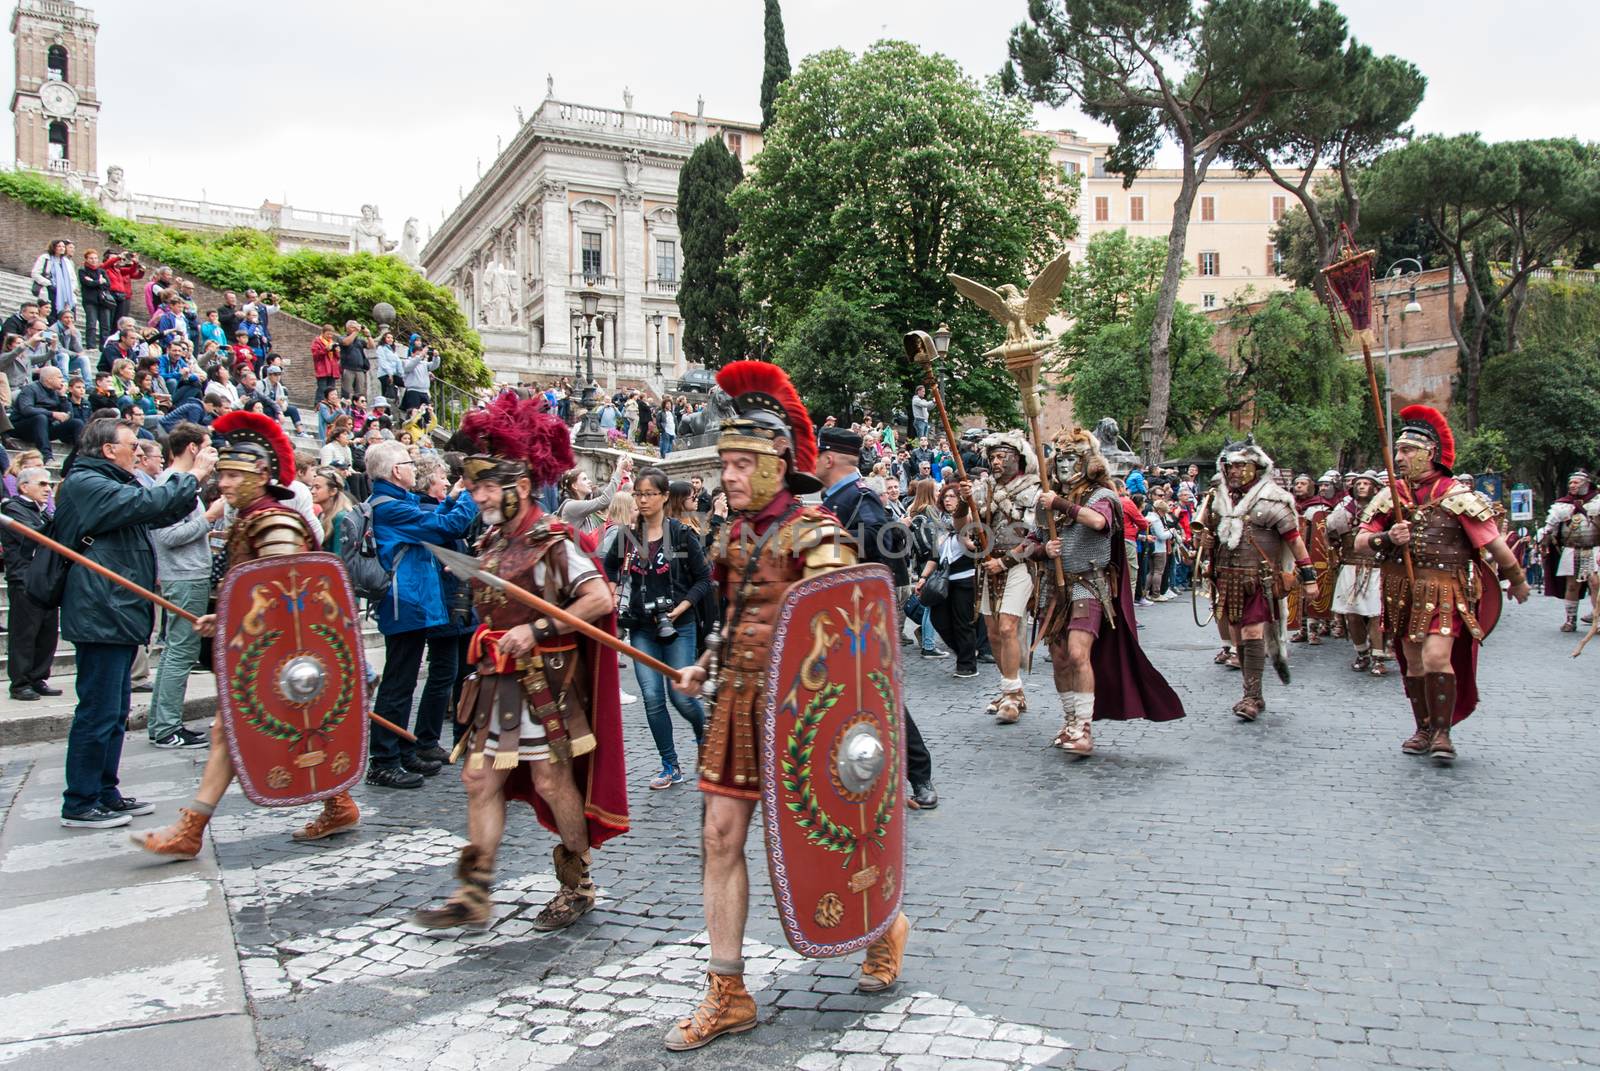 ITALY, Rome: Men dressed as ancient roman centurions parade near the Colosseum to commemorate the legendary foundation of the eternal city in 753 B.C, in Rome on April 24, 2016. 